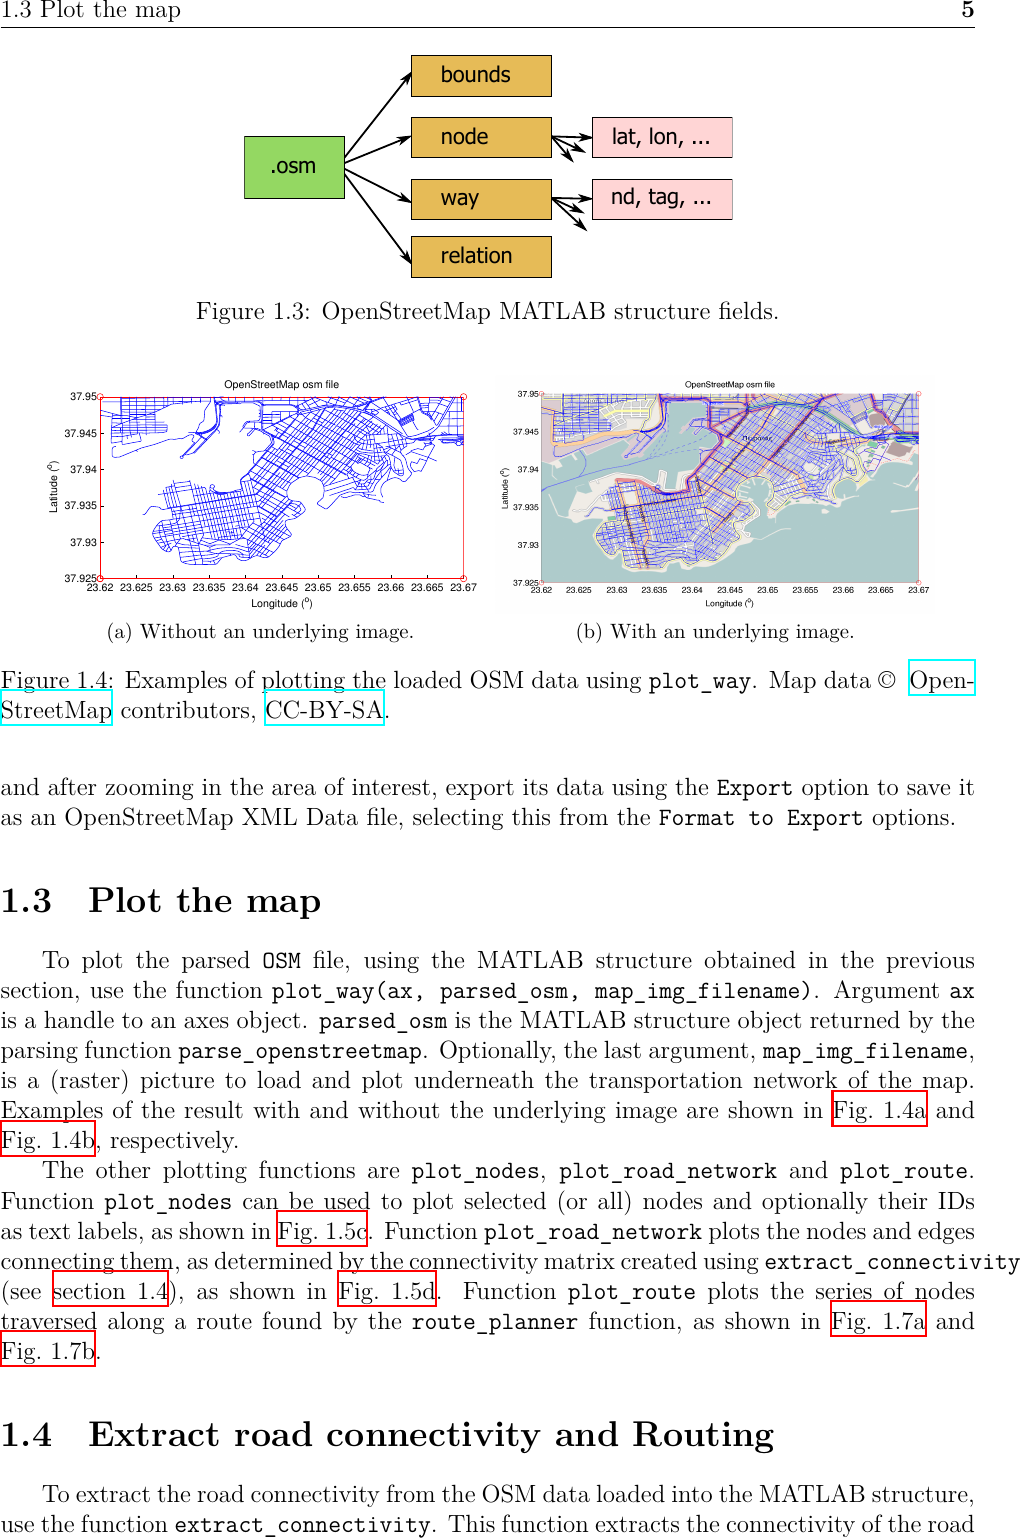 Page 5 of 8 - OpenStreetMap Toolbox For MATLAB V.0.1 User Manual V0.2